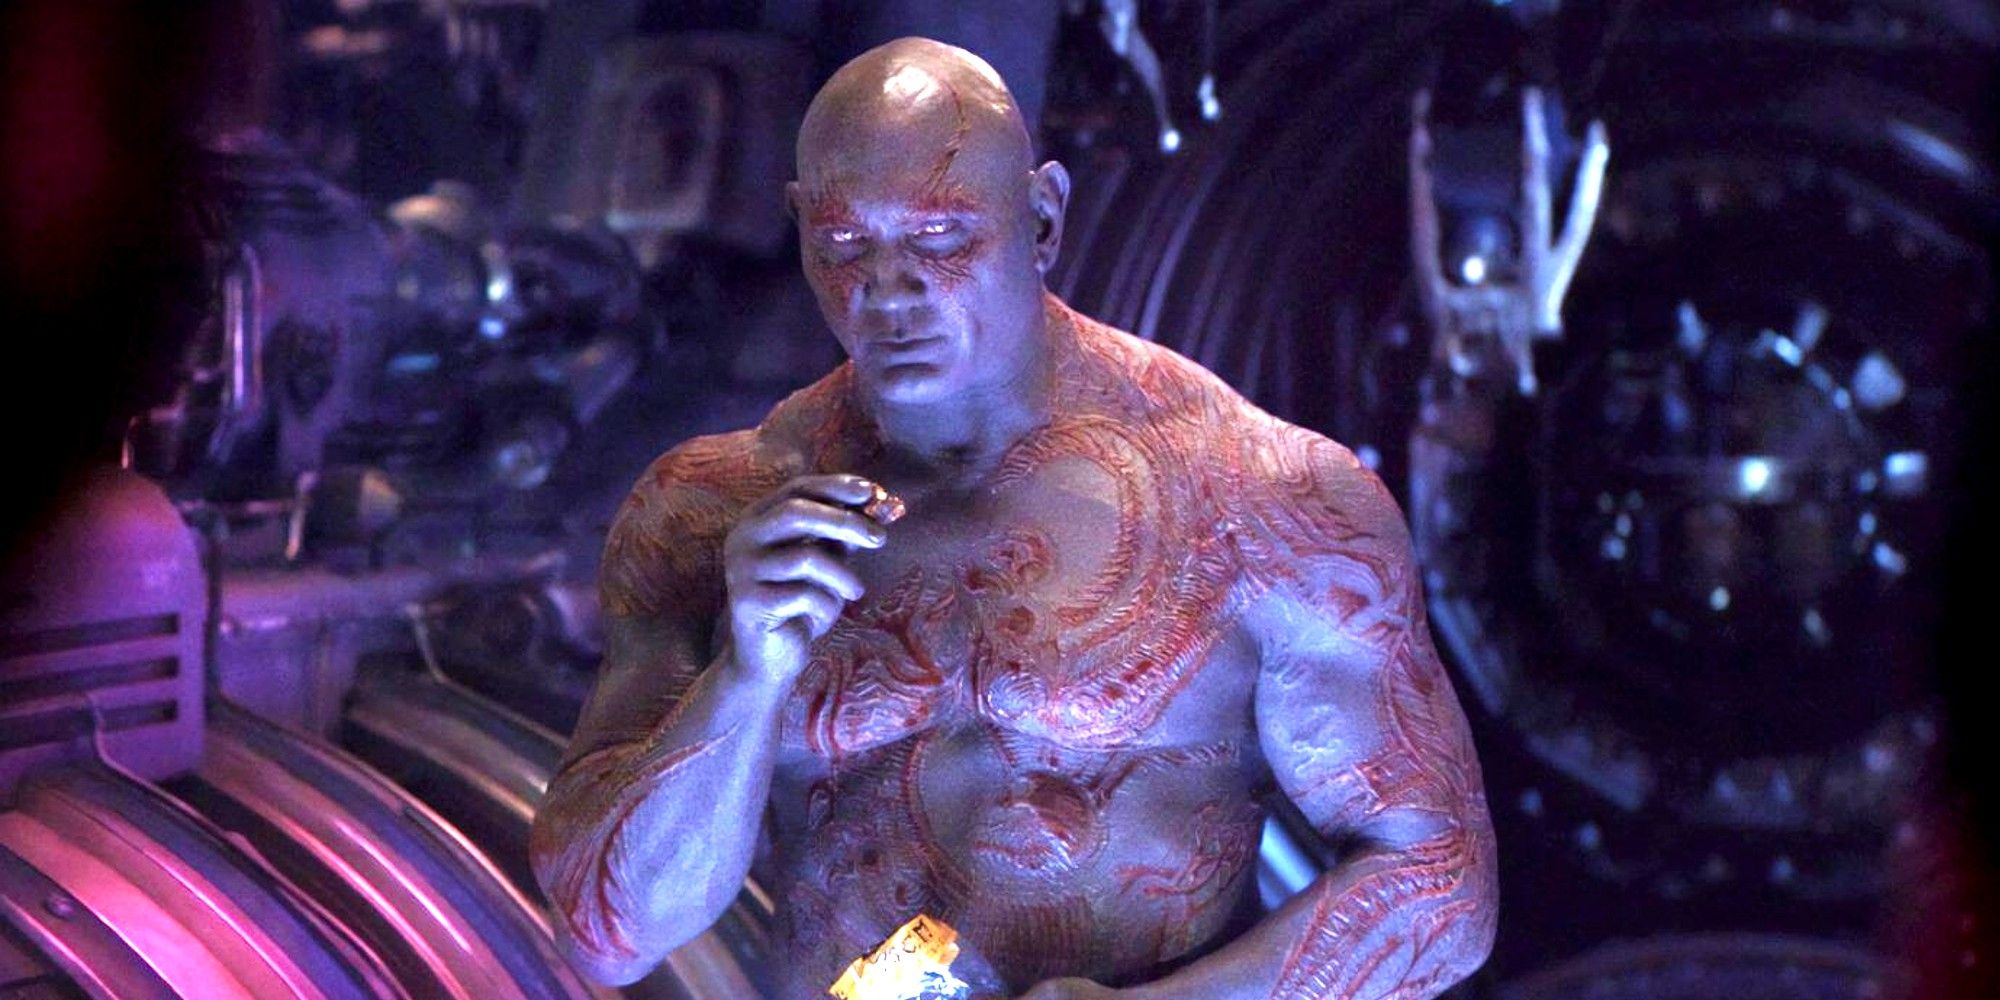 Dave Bautista eating chips as Drax in Avengers: Infinity War